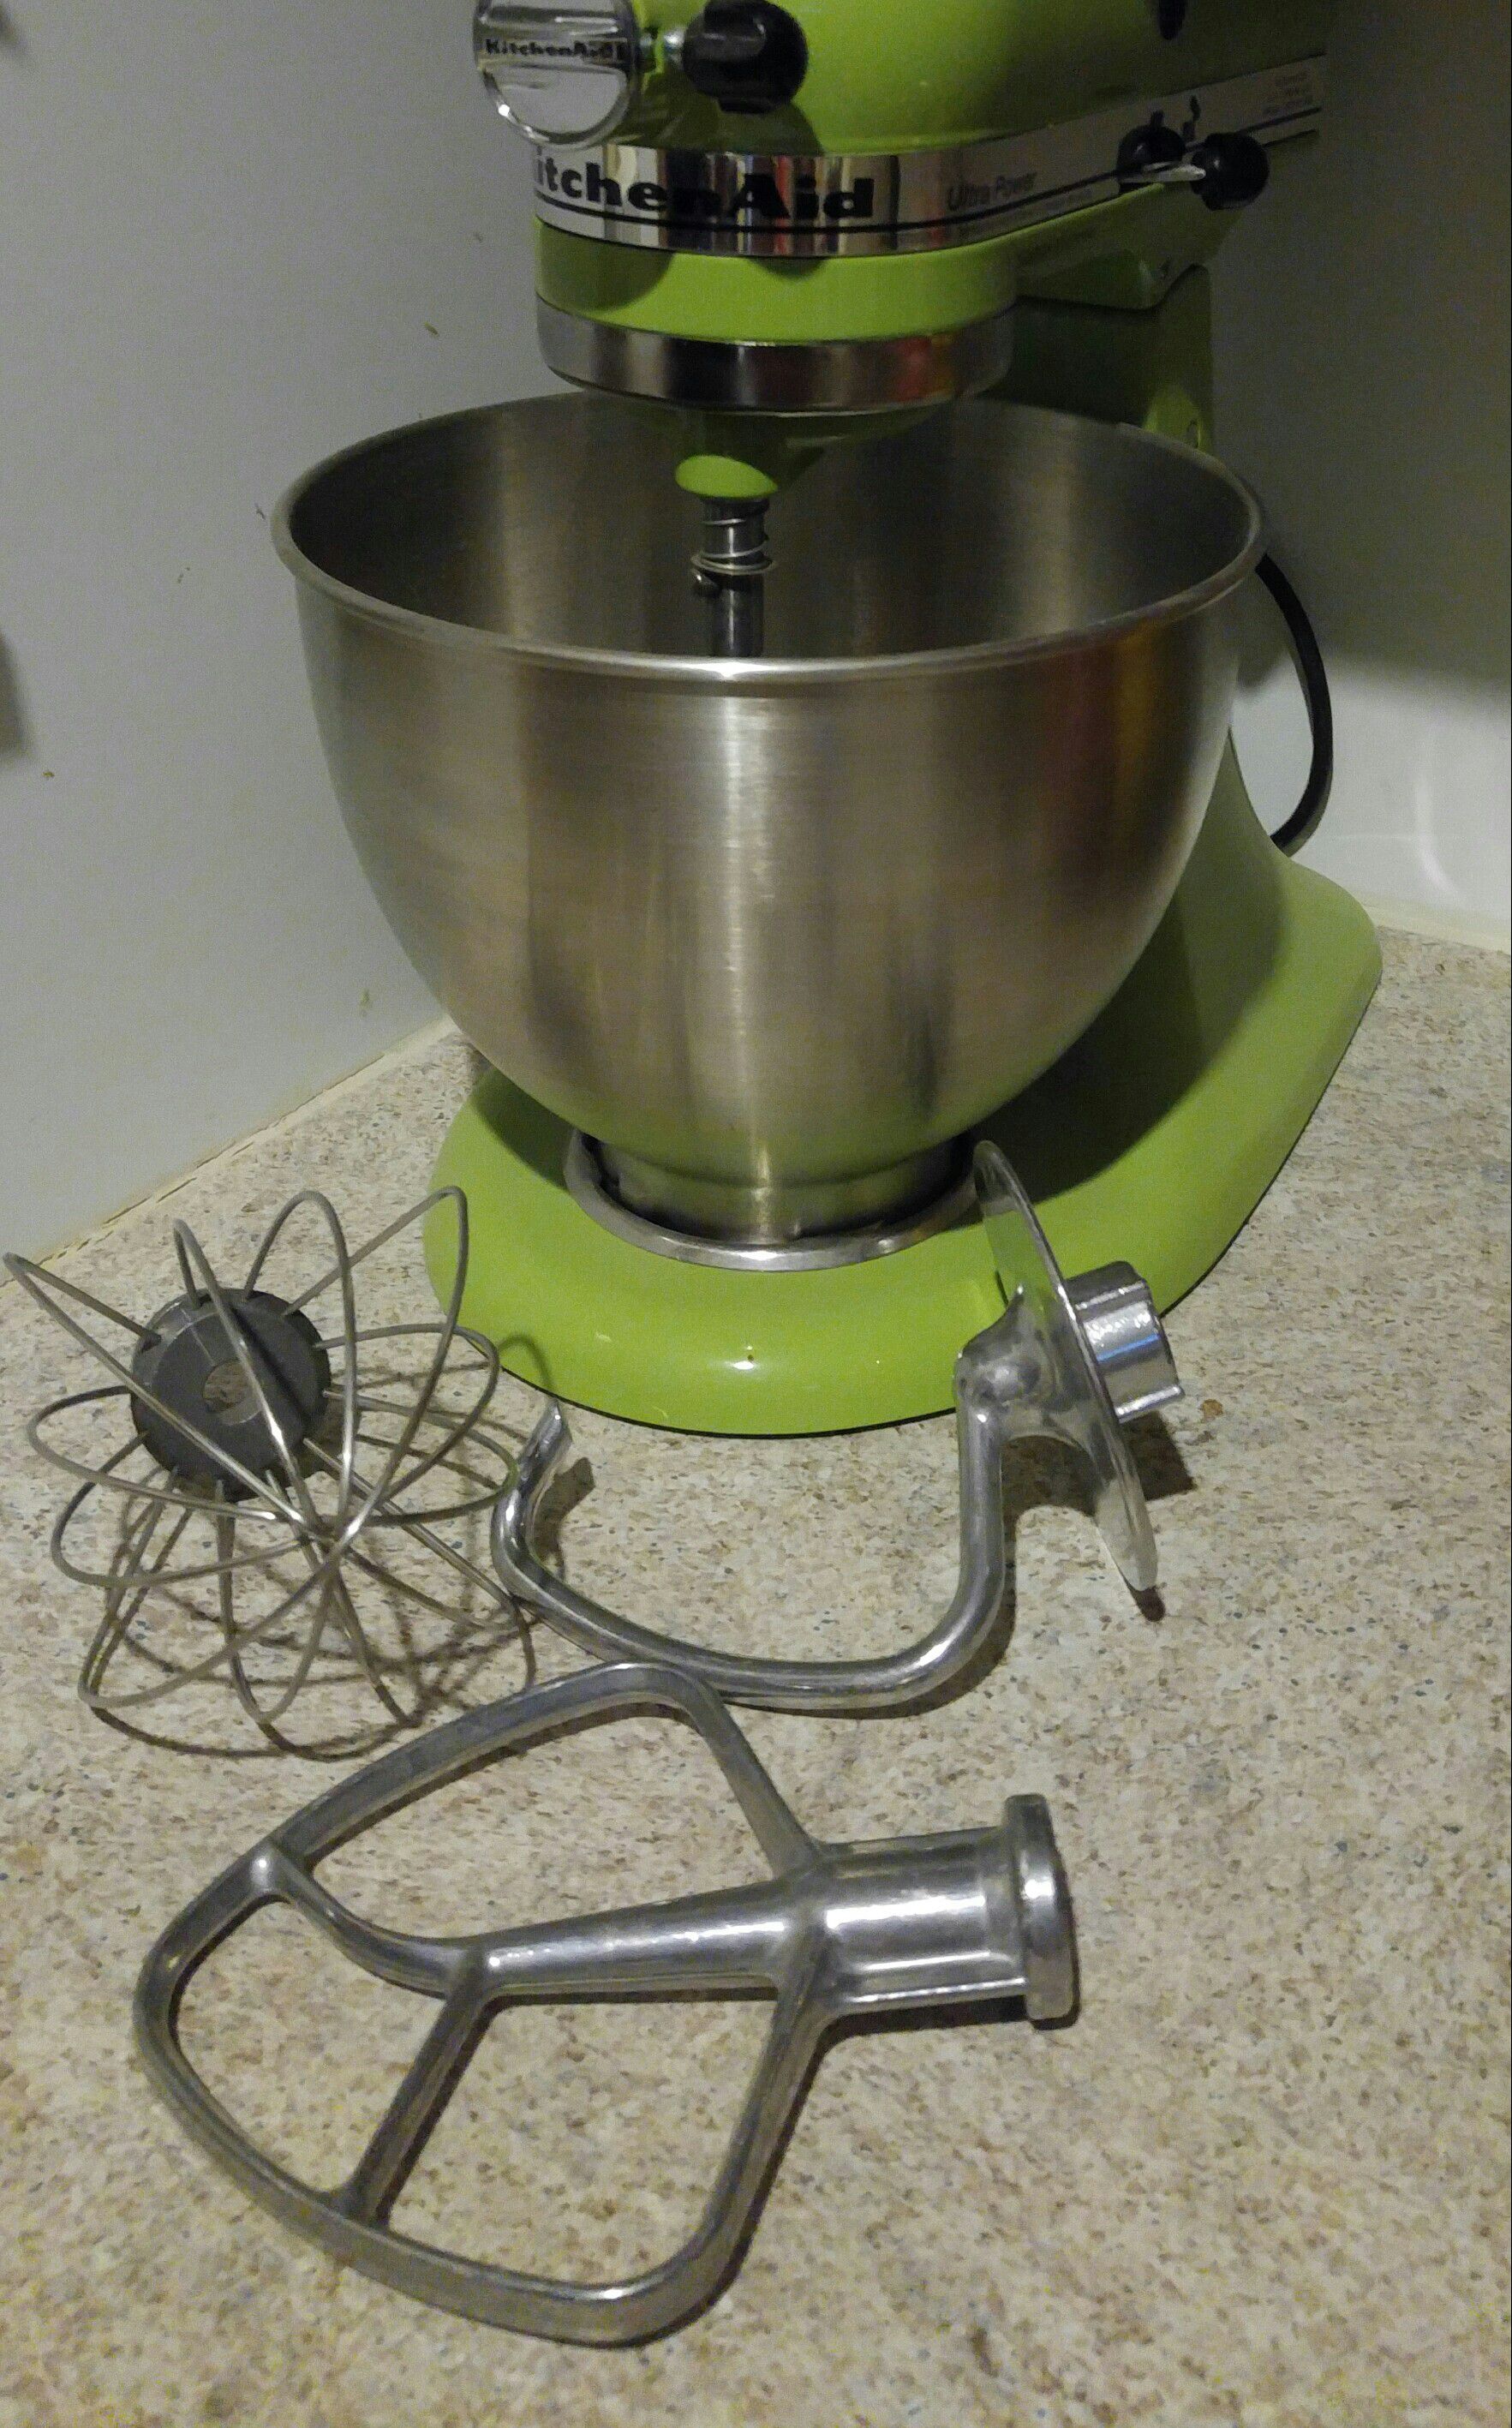 Kitchenaid mixer lime green new for Sale in Oklahoma City, OK - OfferUp